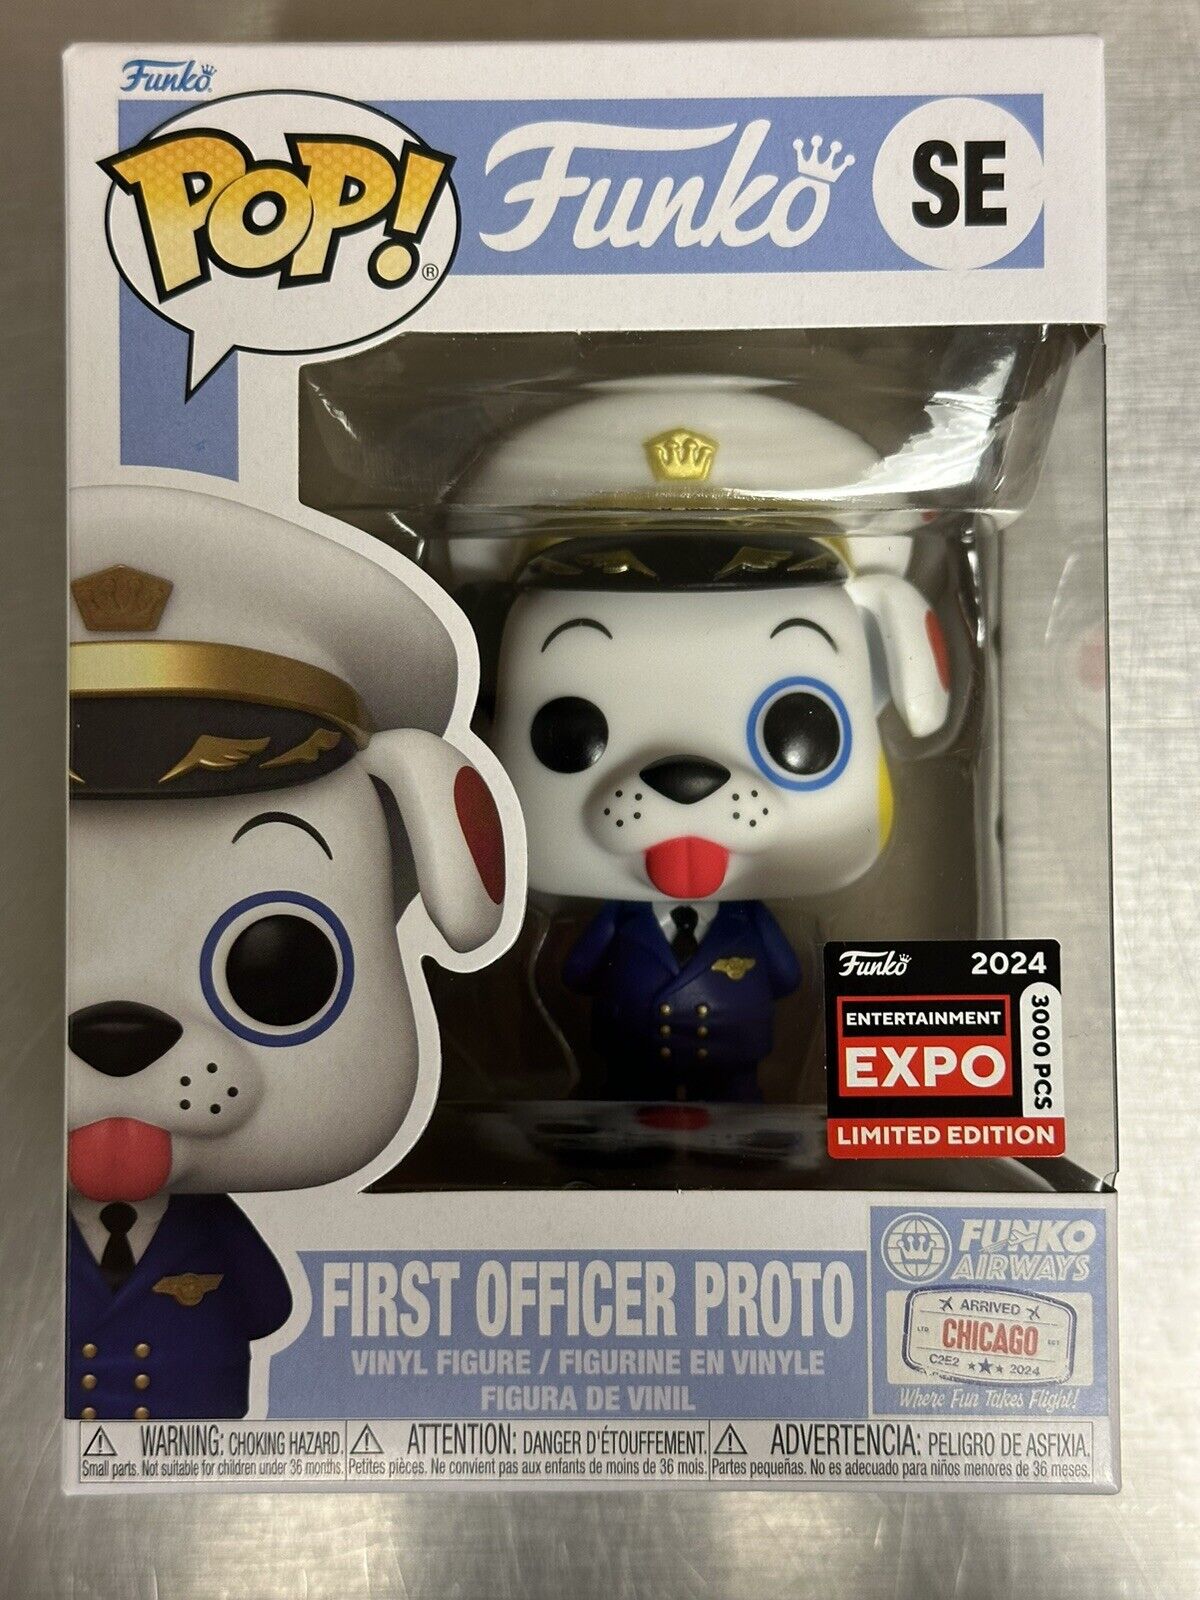 Flawed box Funko pop First Officer Proto SE C2E2 Shared Expo Sticker In Hand